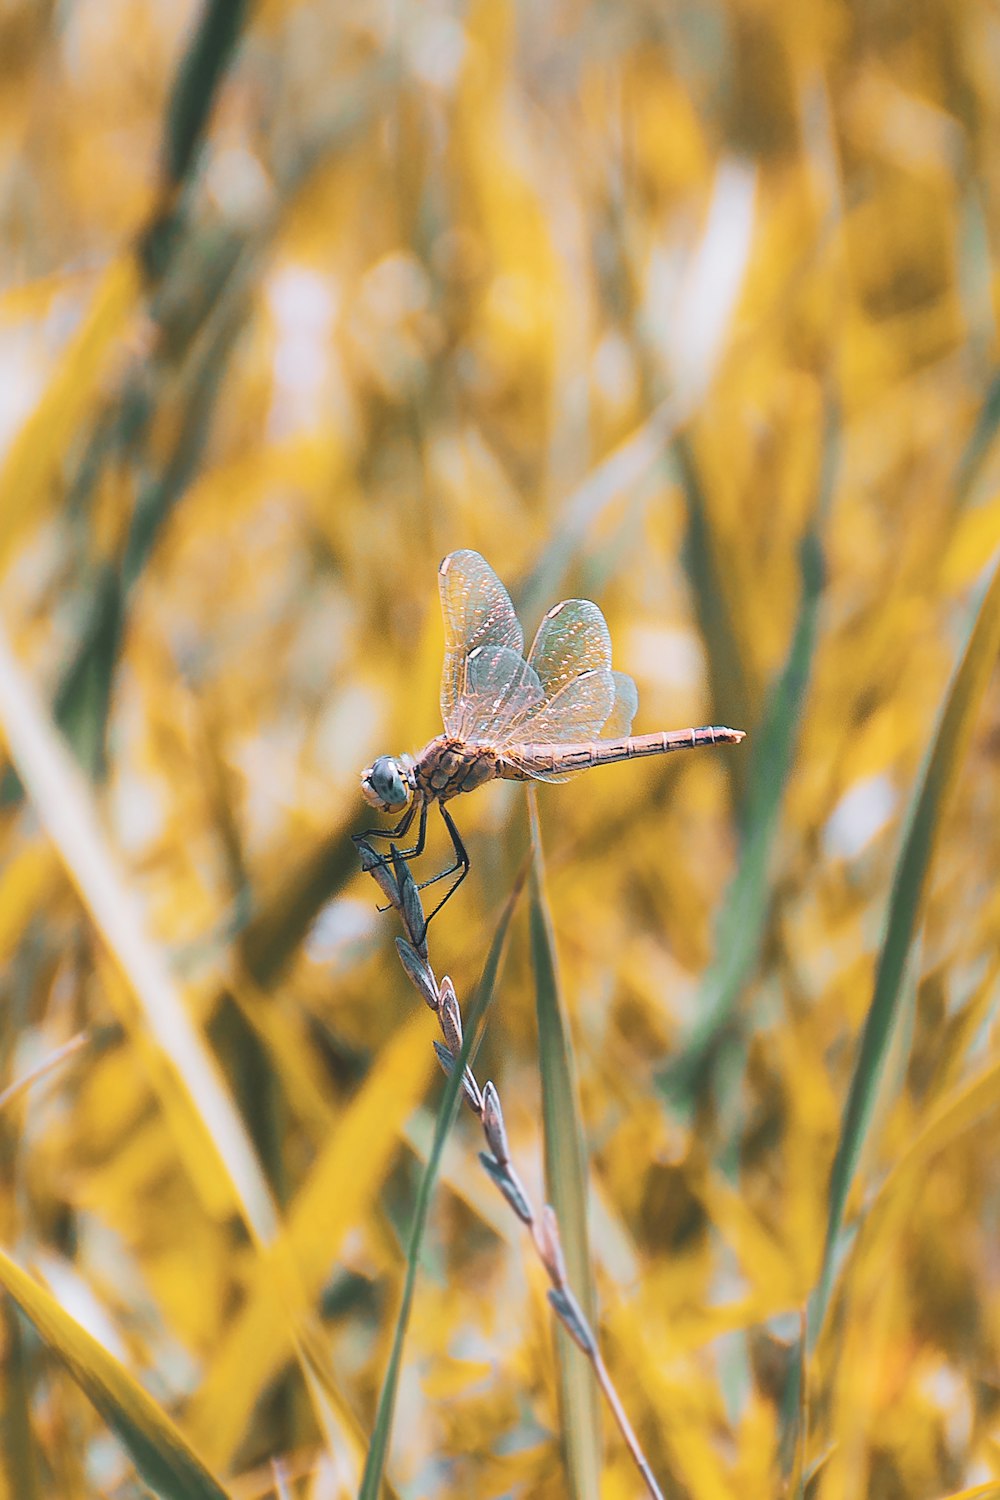 brown dragonfly perched on brown plant stem in close up photography during daytime